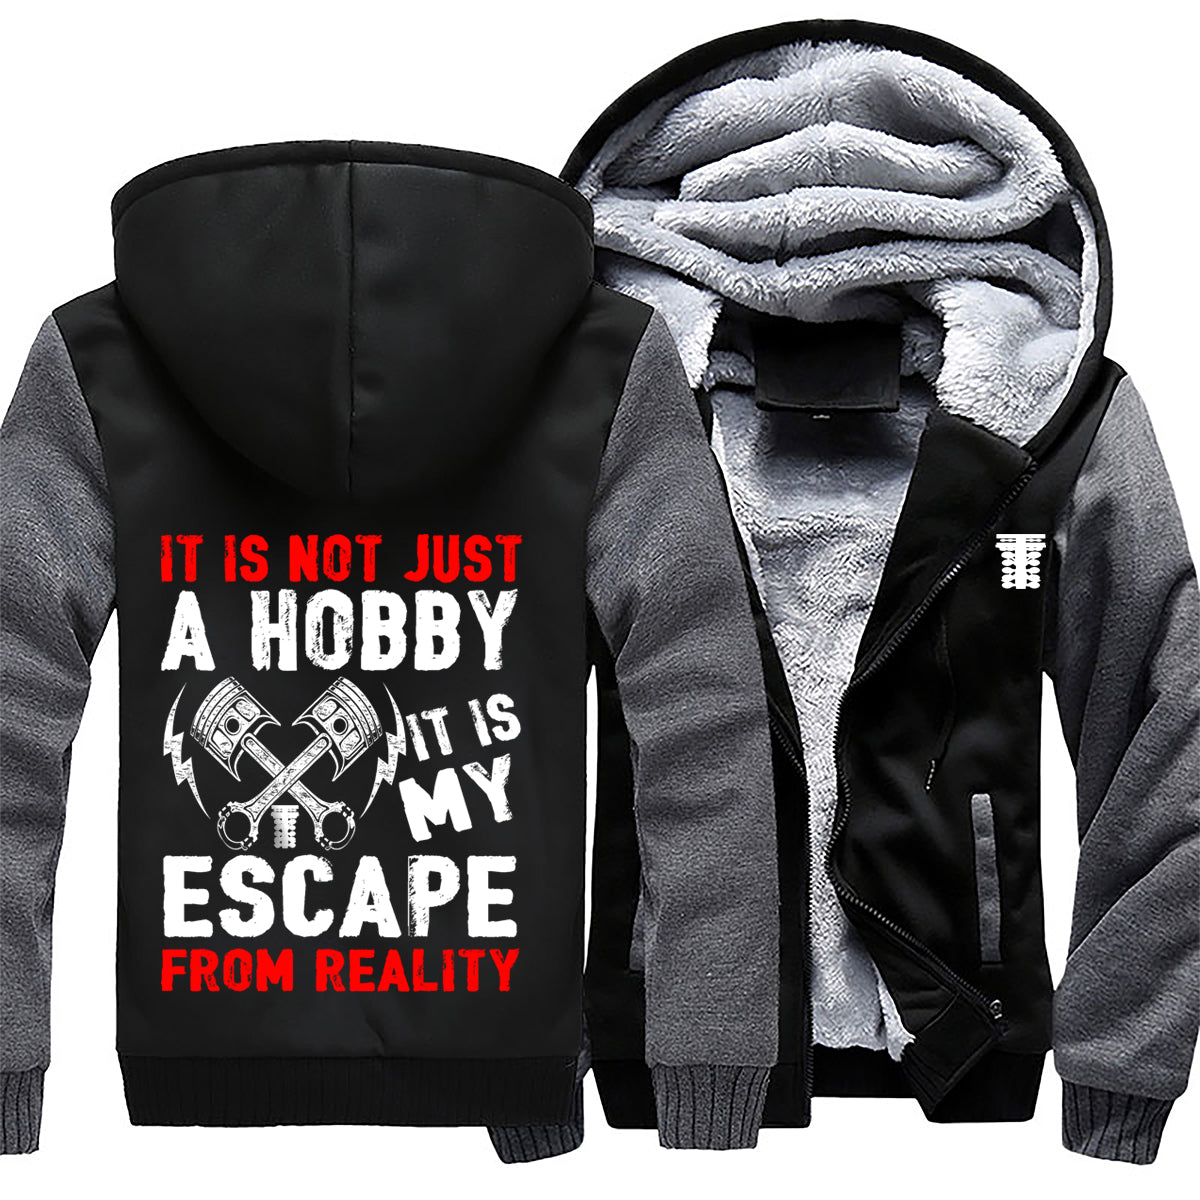 It's Not Just A Hobby It's My Escape From Reality Drag Racing Jacket 